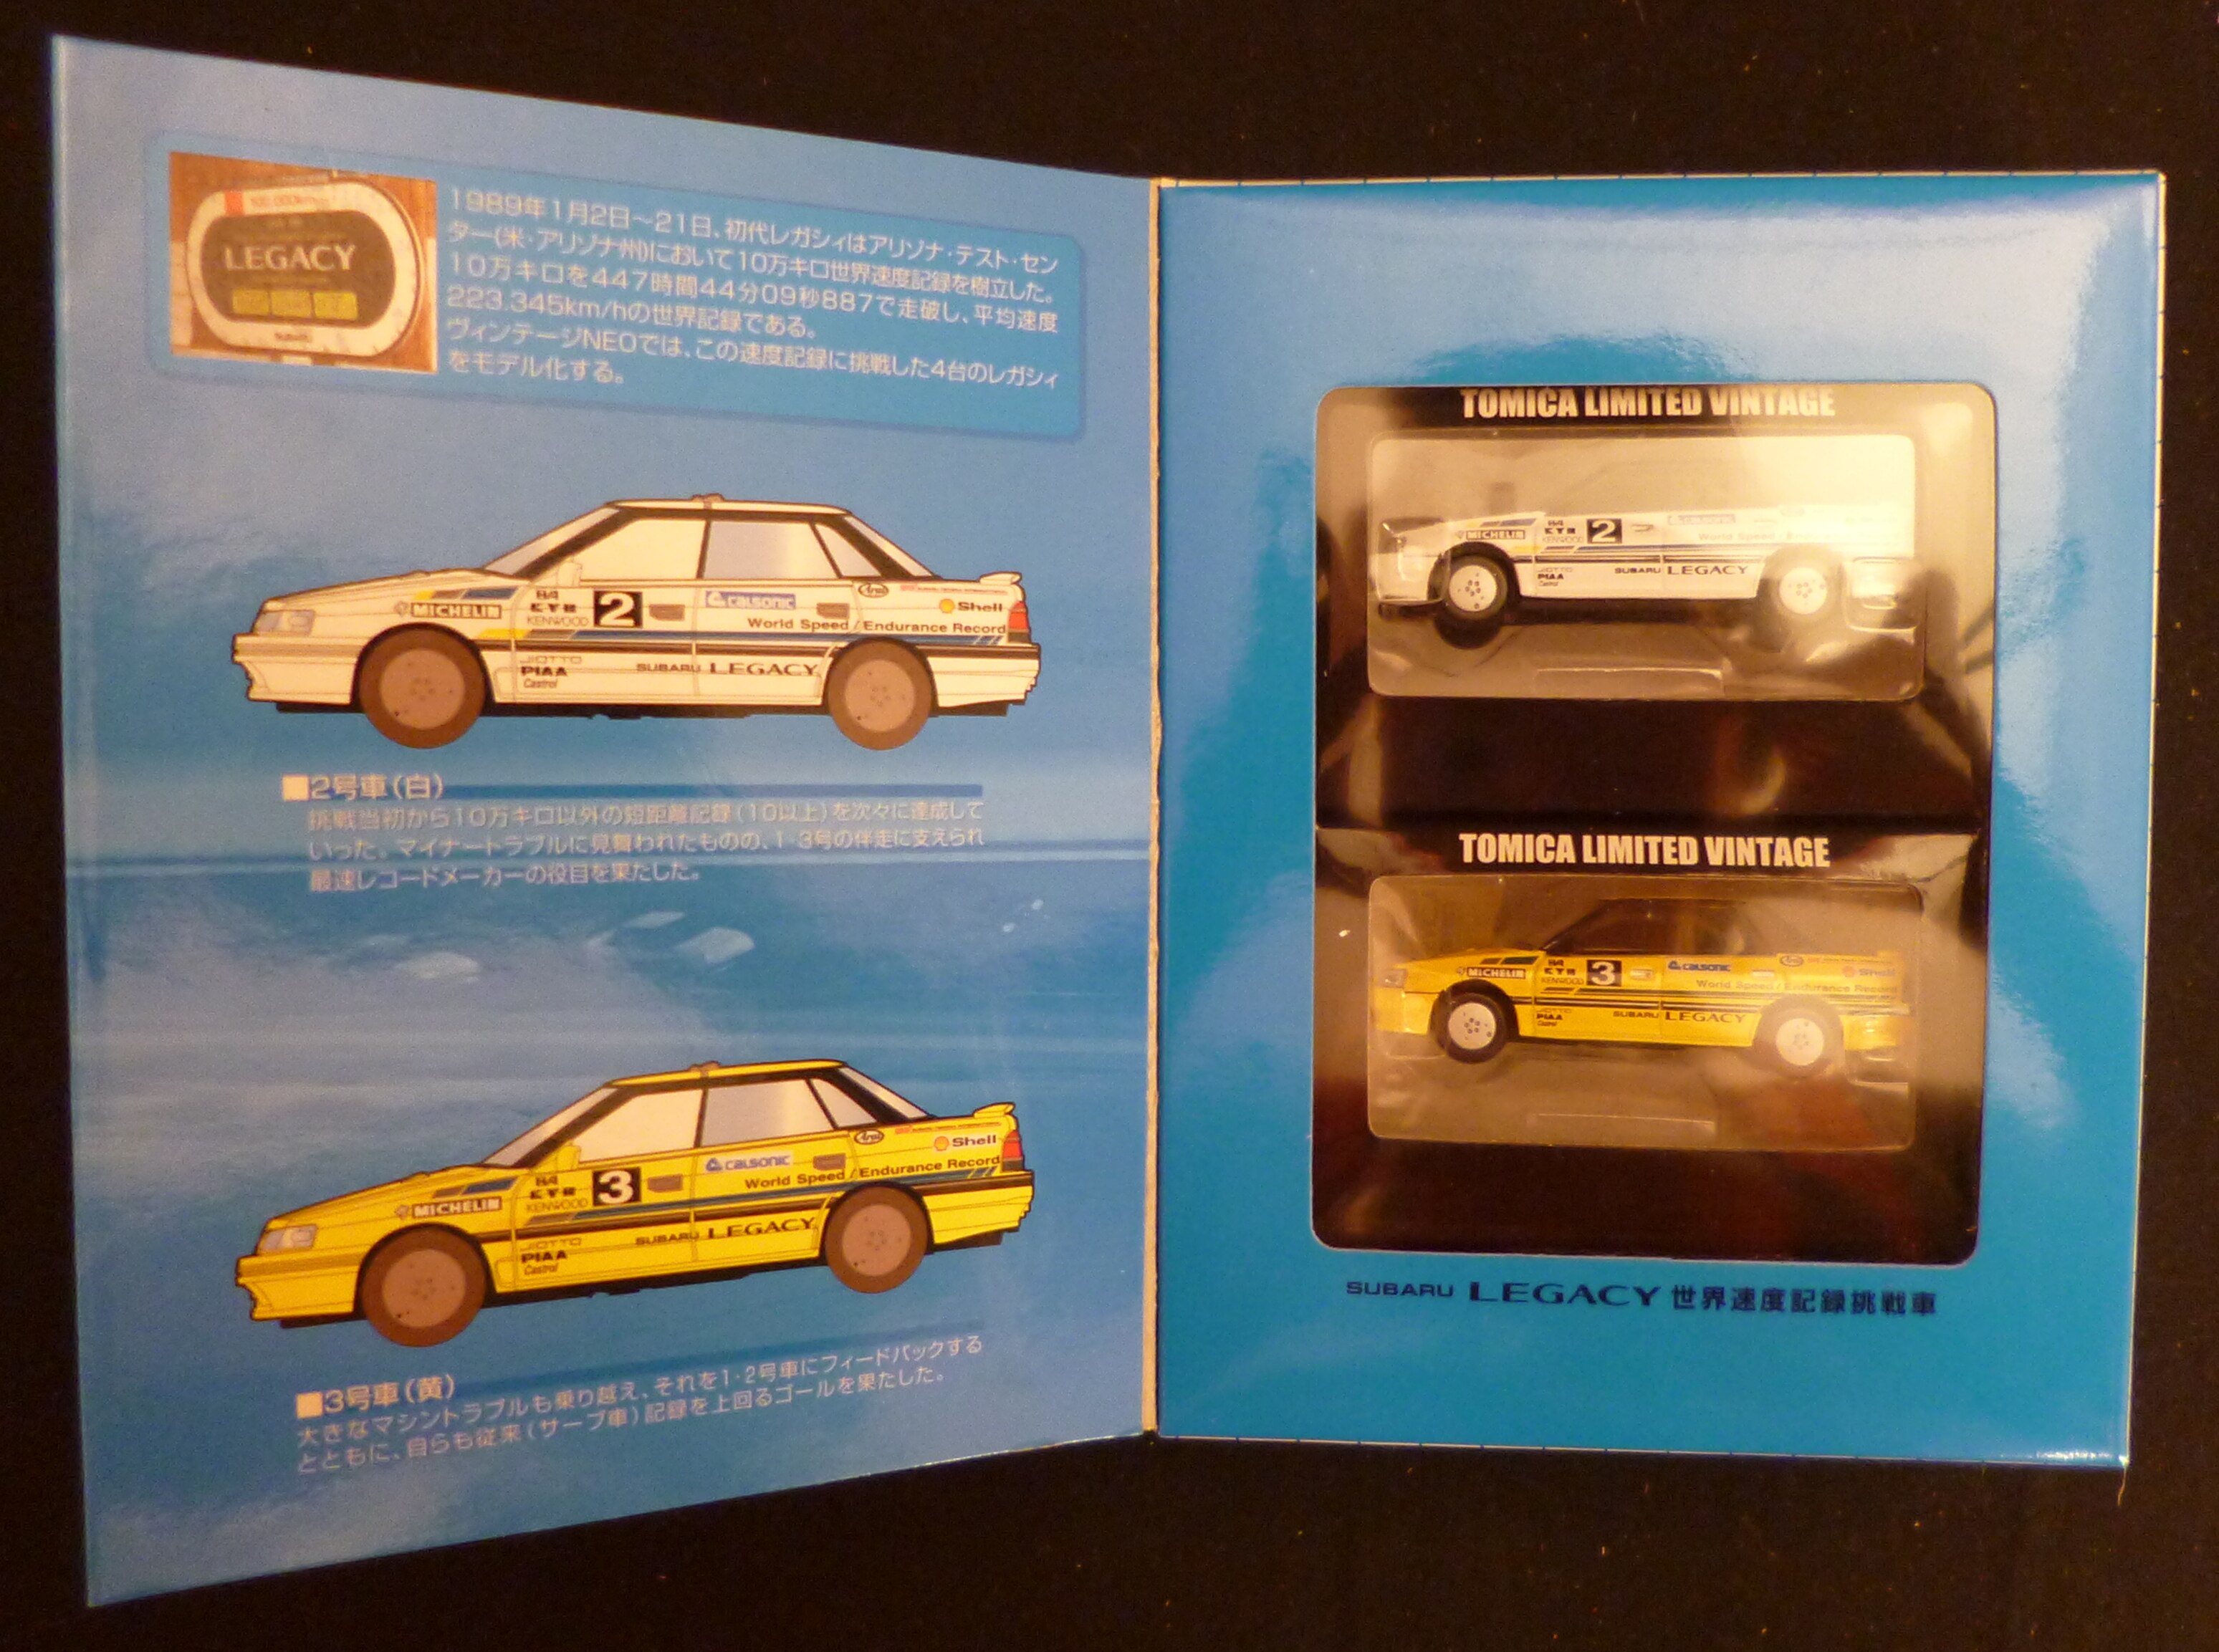 Tomica Limited Vintage Neo Subaru Legacy World Speed Record Challenge Car Vol.1